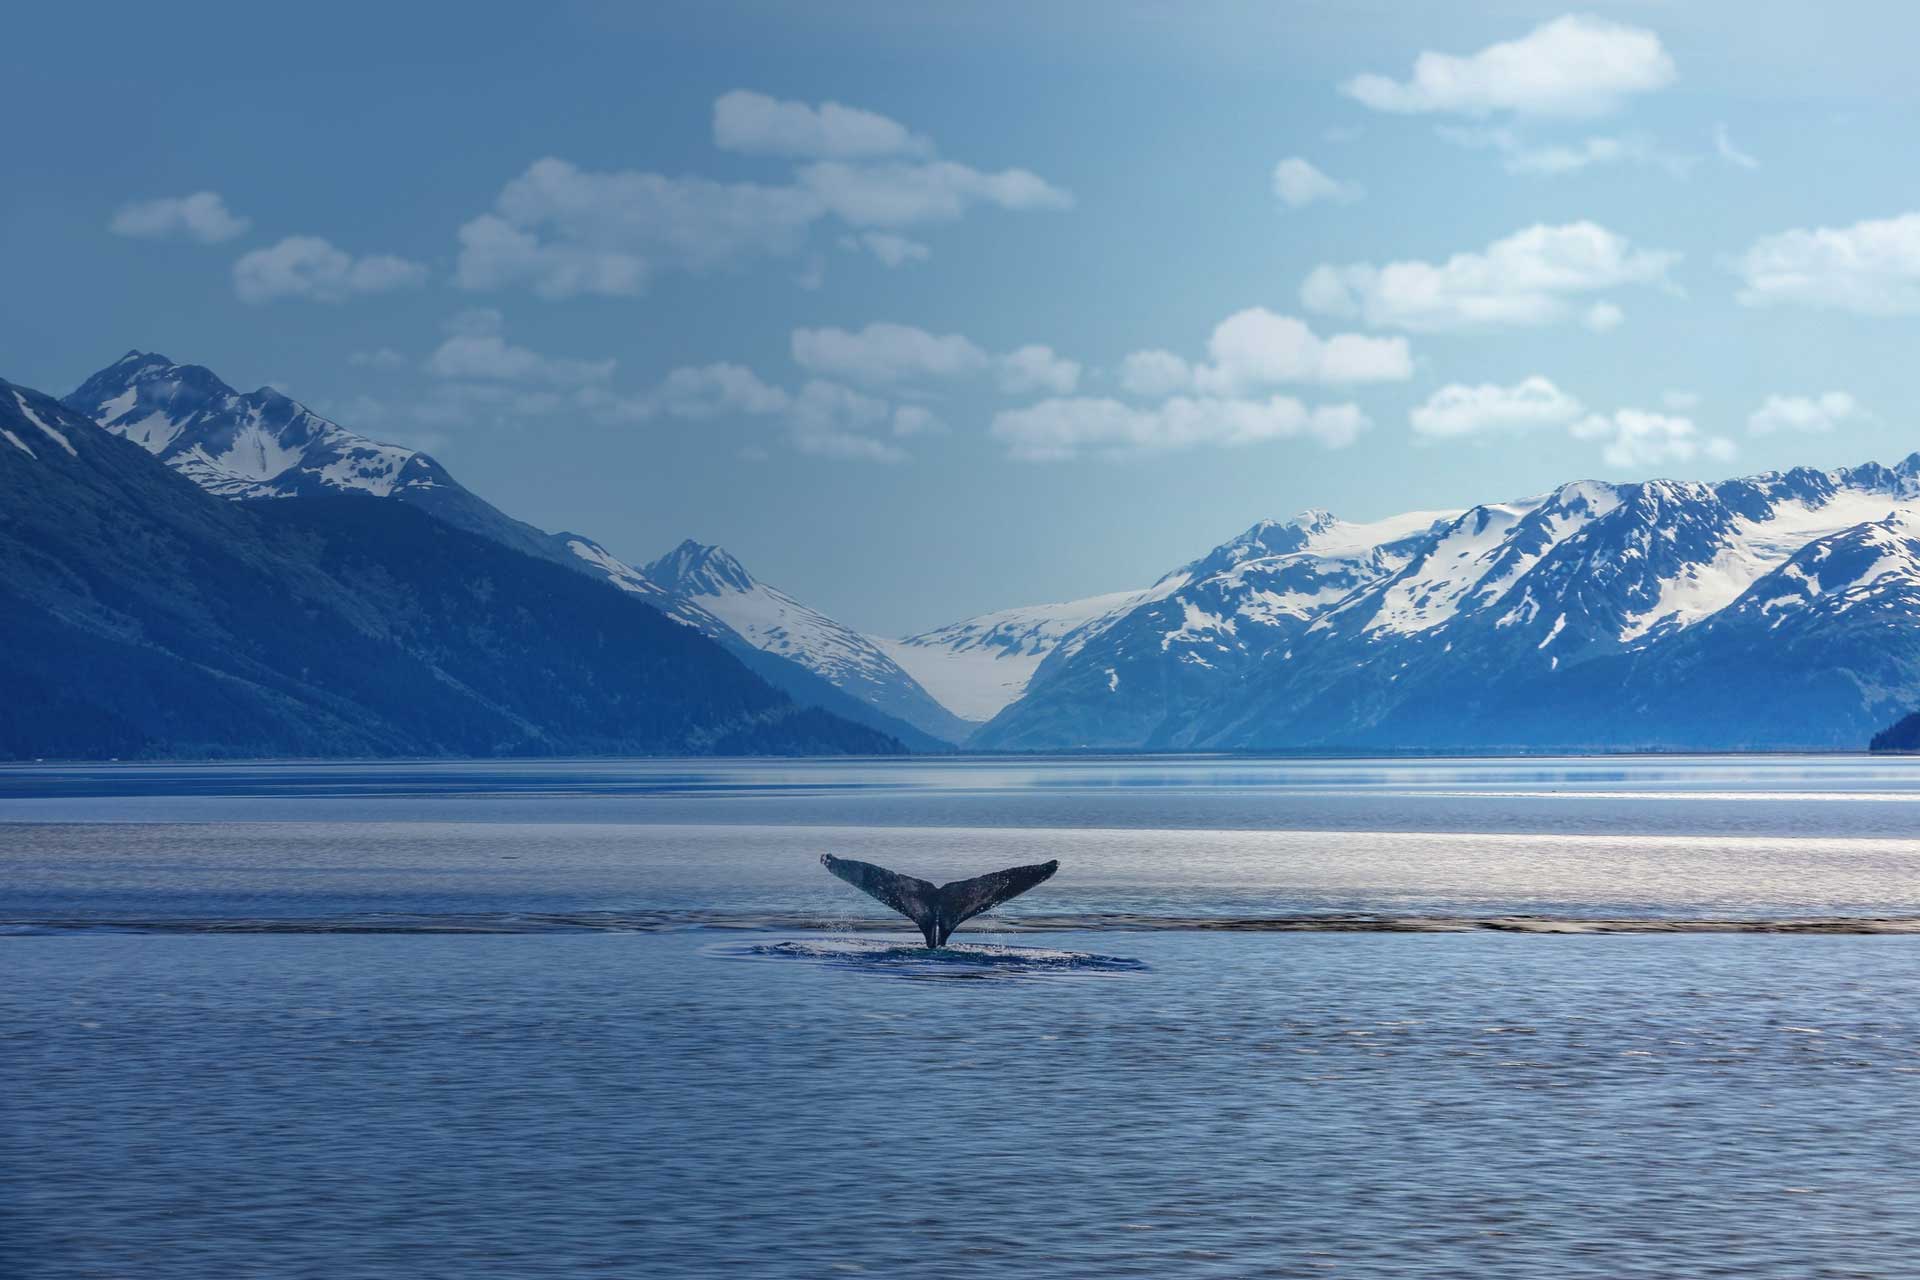 Whale tail sticking out of water in Alaskan ocean